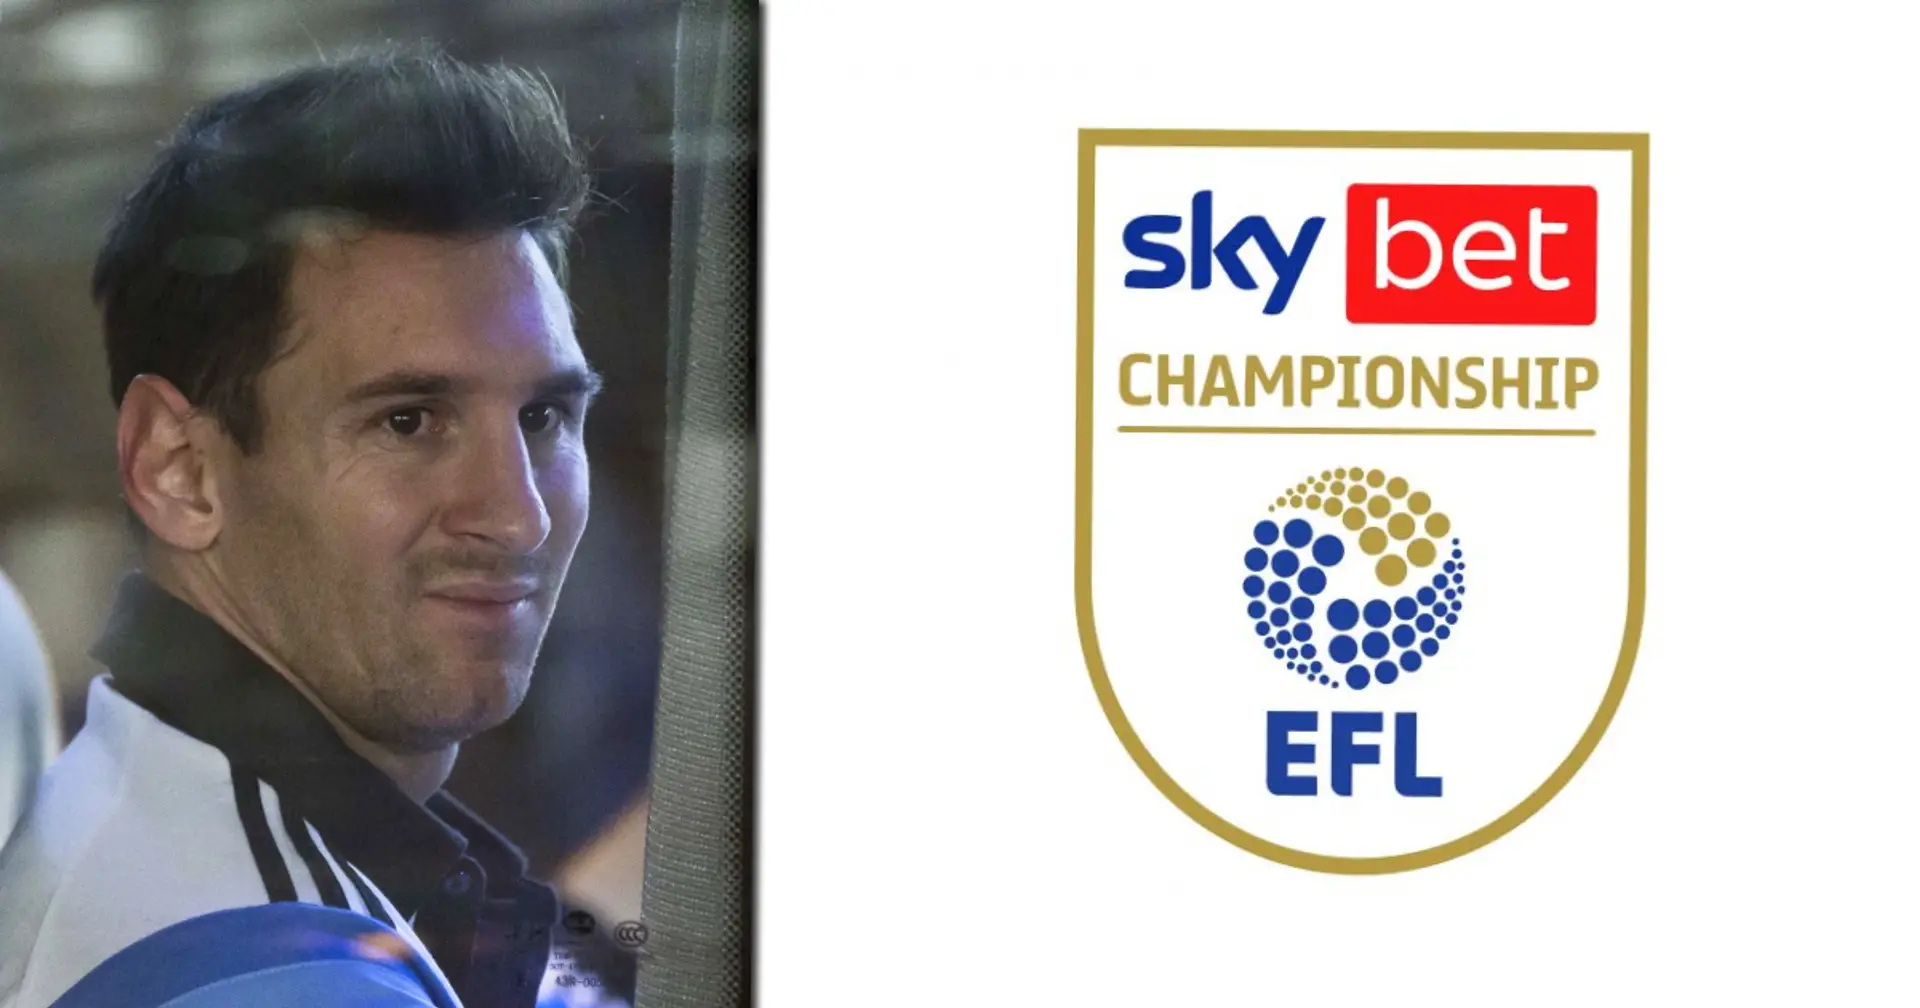 Stoke City fan claims Leo Messi would score less in Championship than in Premier League